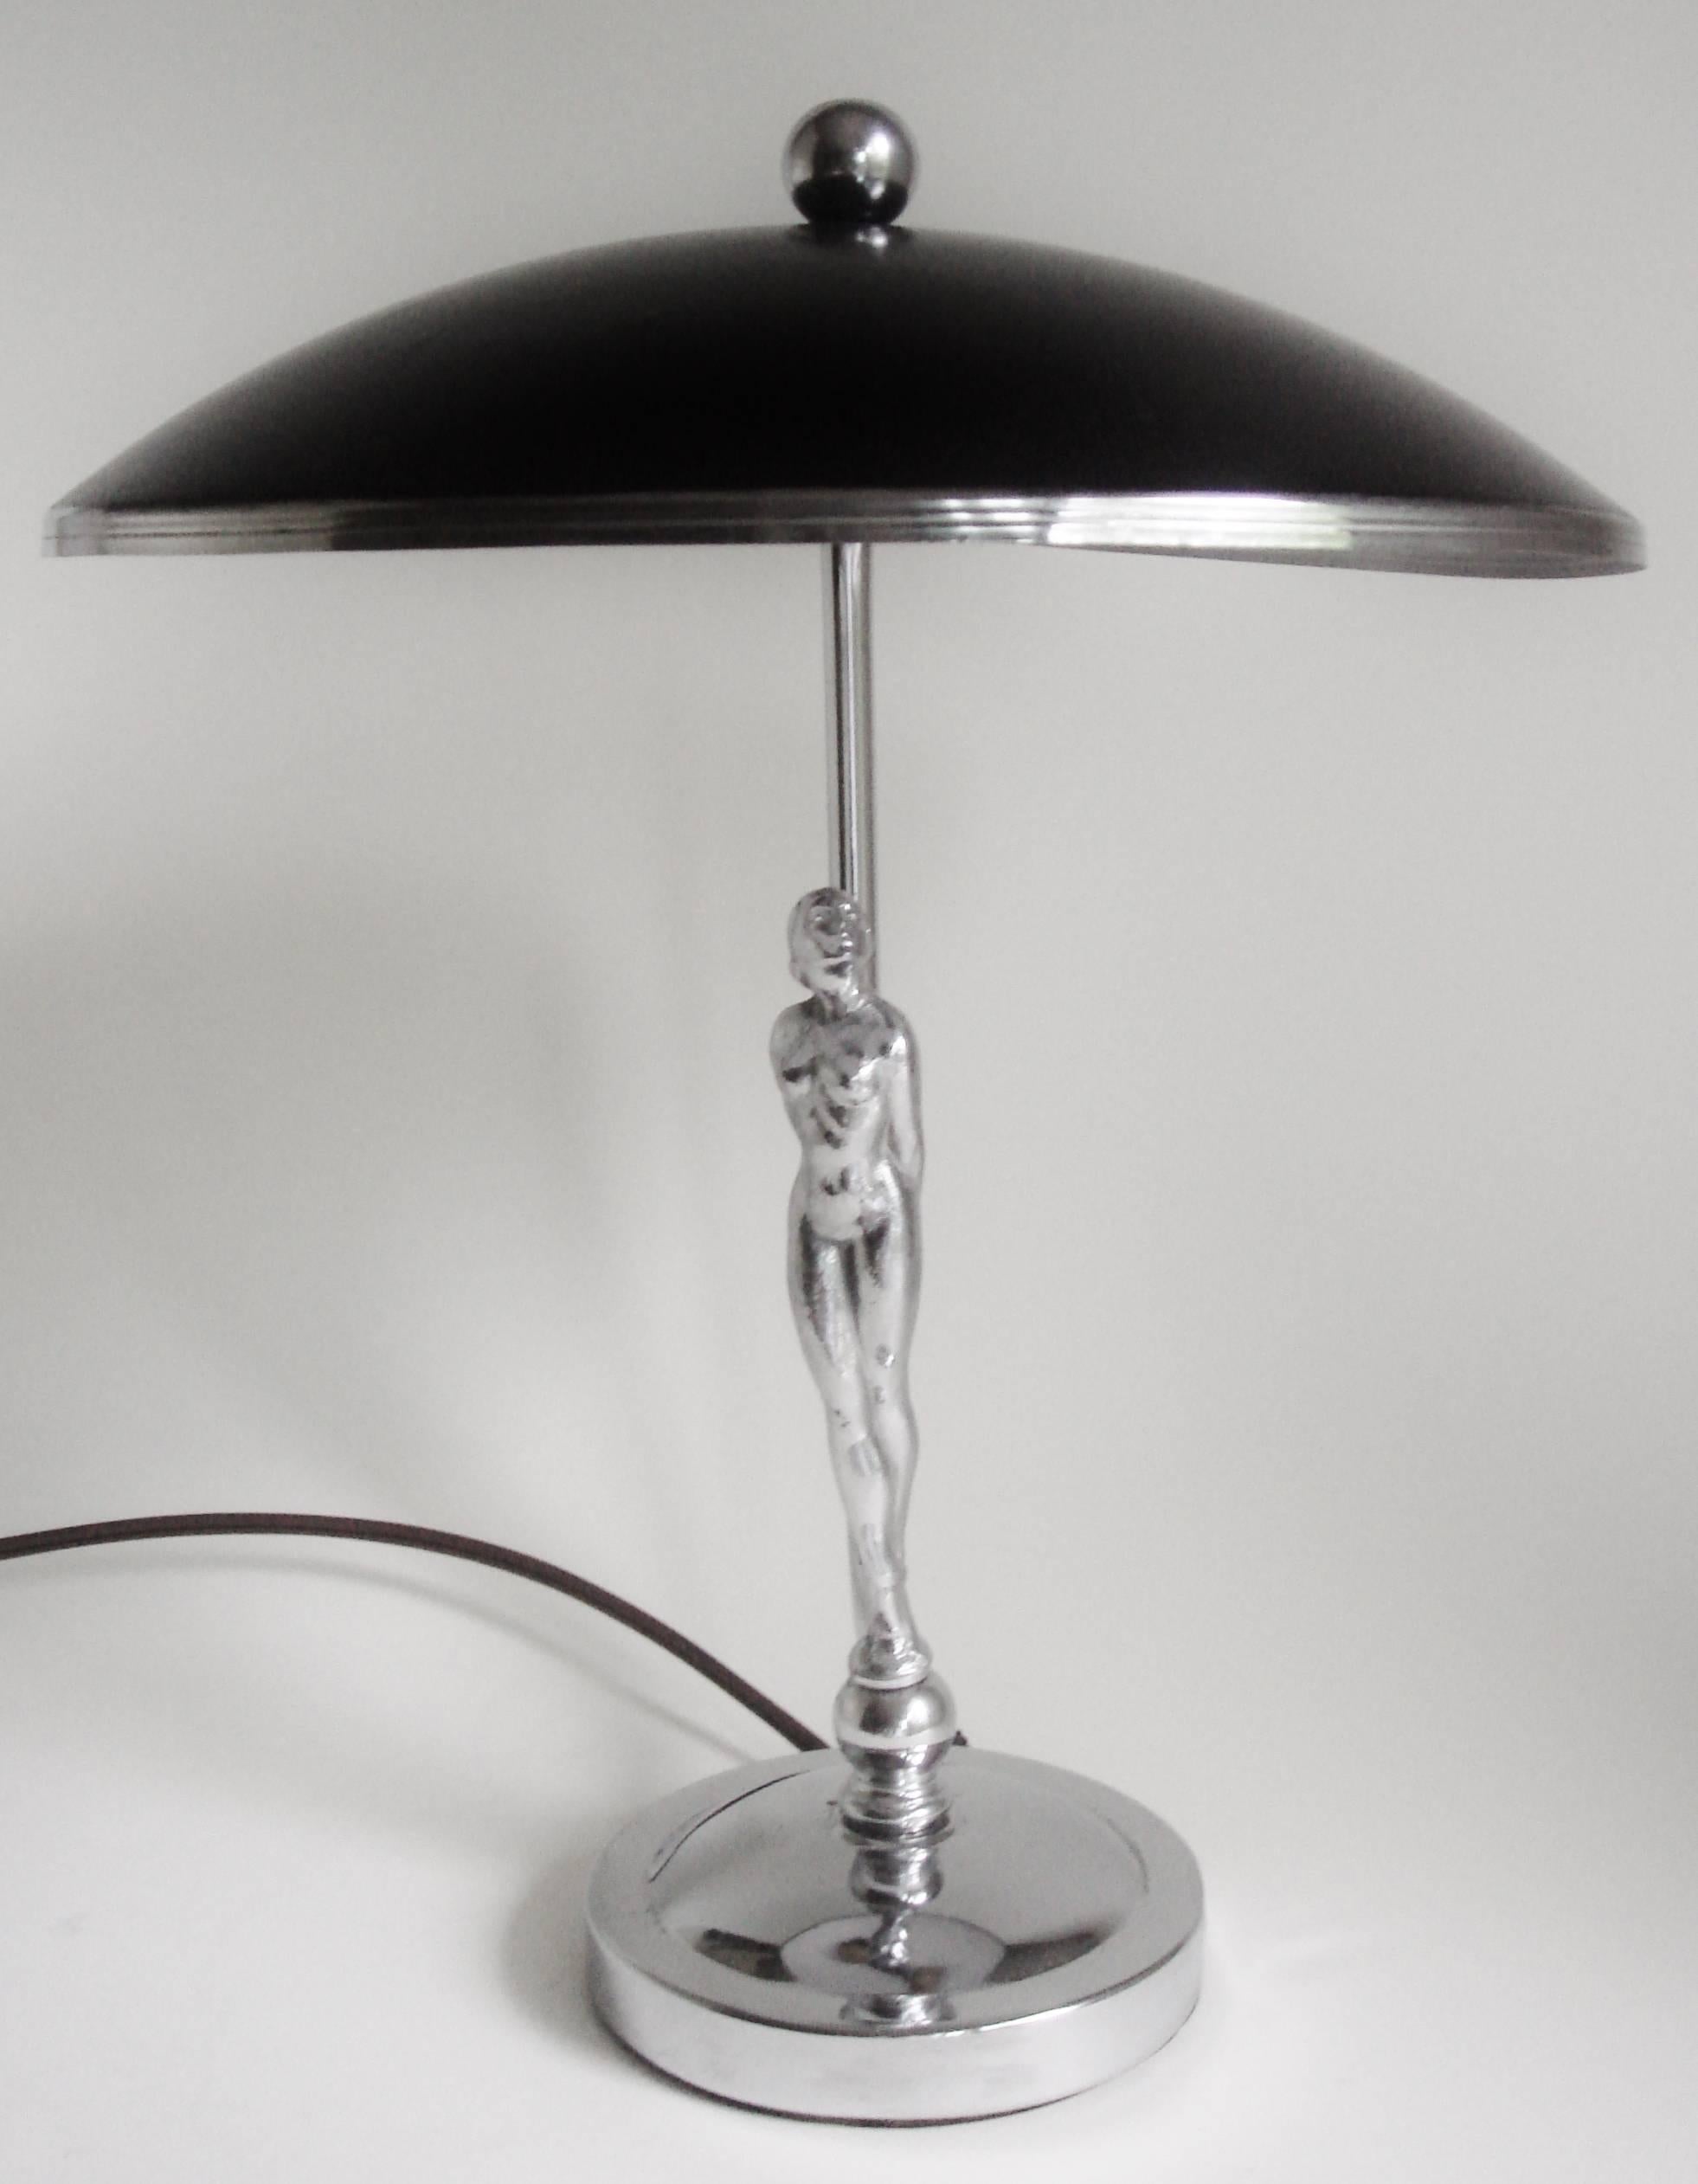 This rare American Art Deco chrome and black enamel shaded desk lamp features a chrome circular stepped cushion base that supports a beautifully sculpted chrome nude female figure standing on a chrome sphere. A chrome tube rises up from the rear of